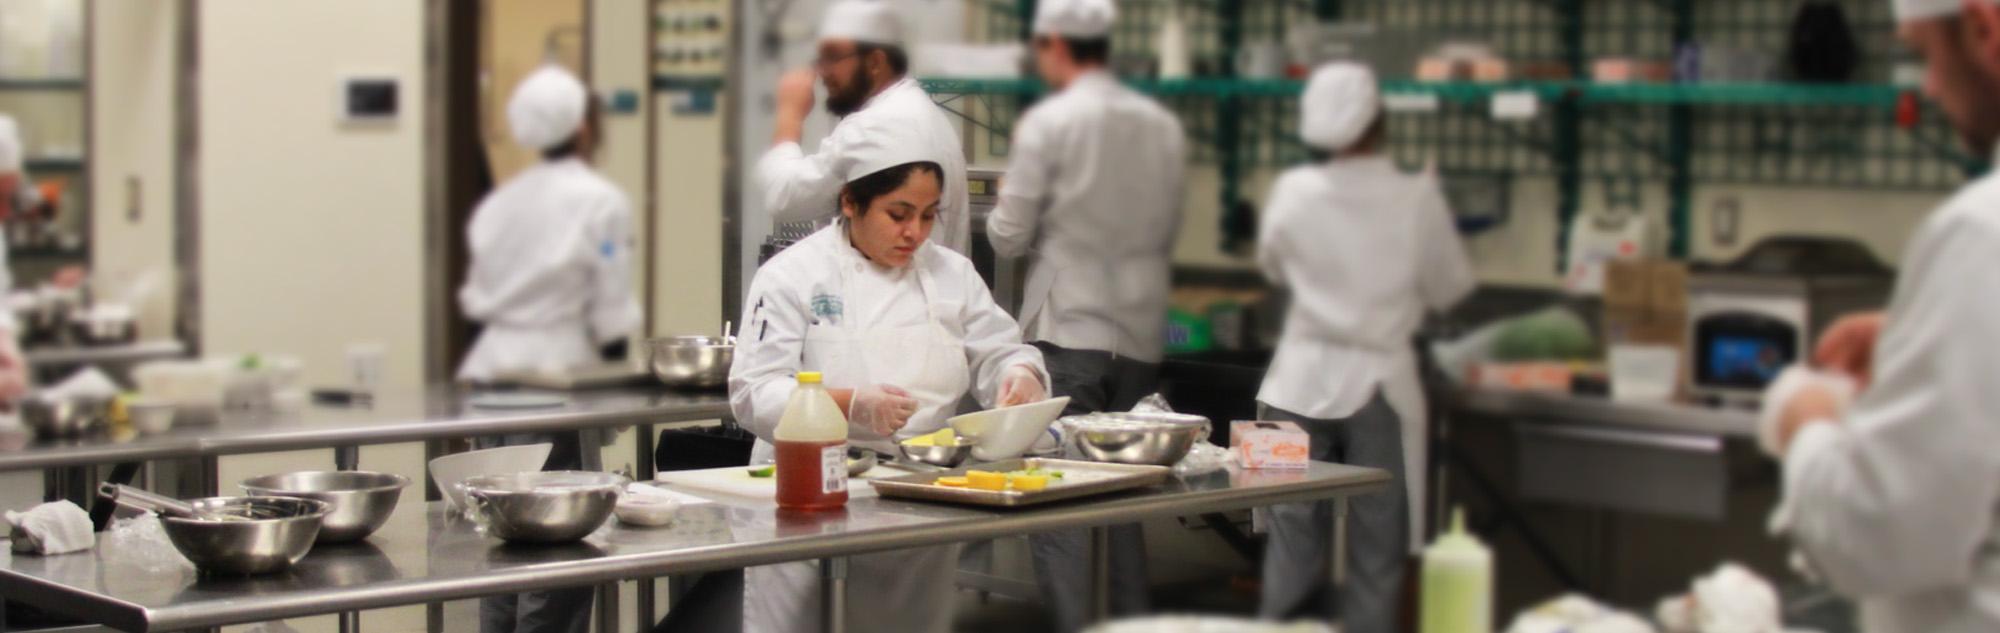 Culinary students prepare entrees in kitchen classroom.